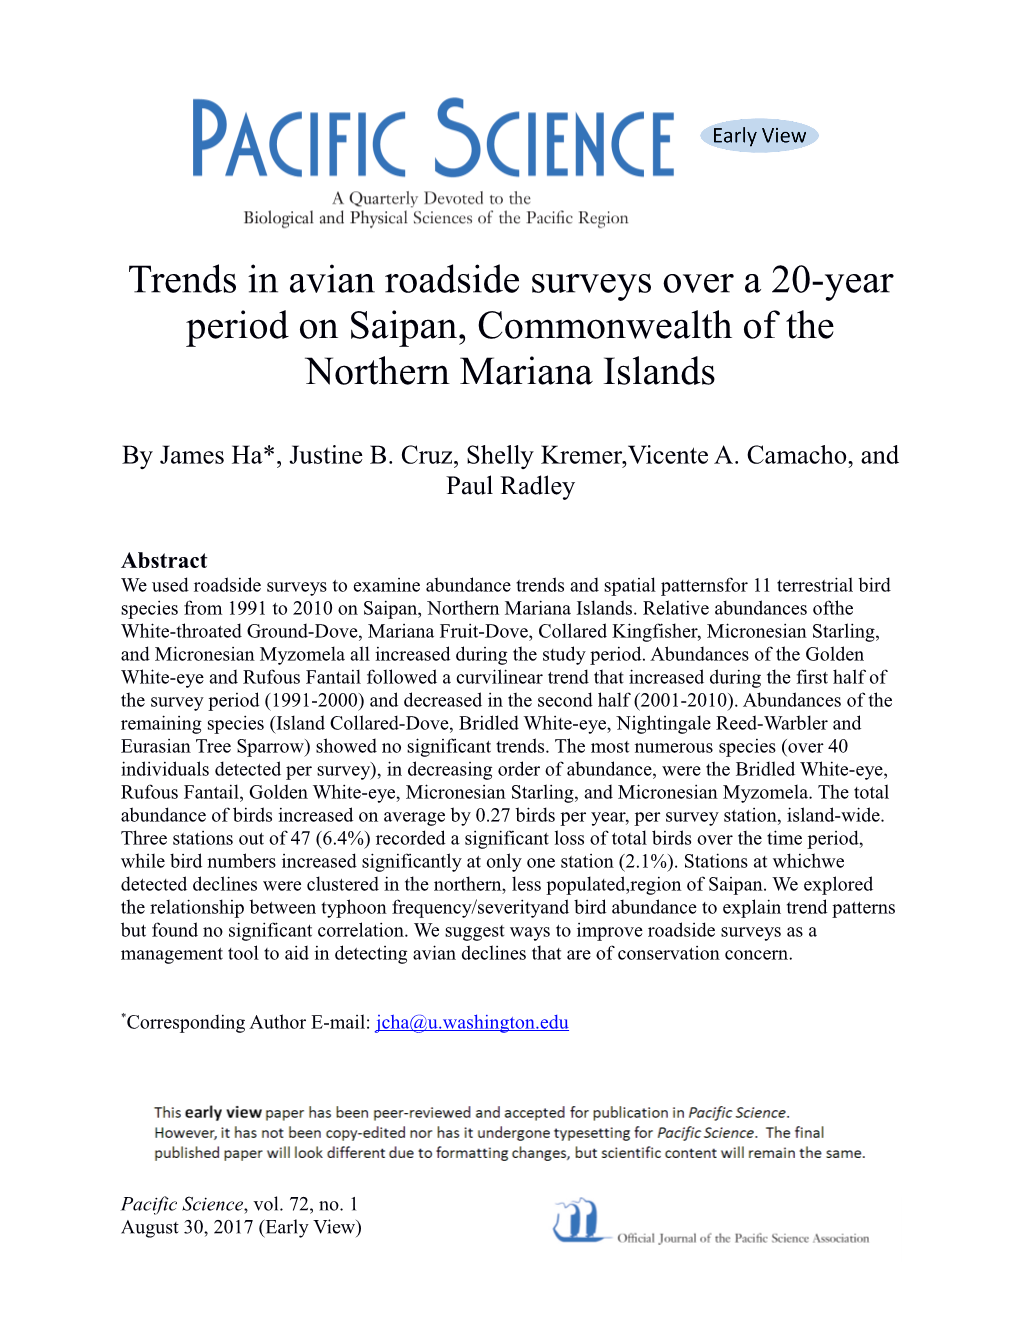 Trends in Avian Roadside Surveys Over a 20-Year Period on Saipan, Commonwealth of the Northern Mariana Islands